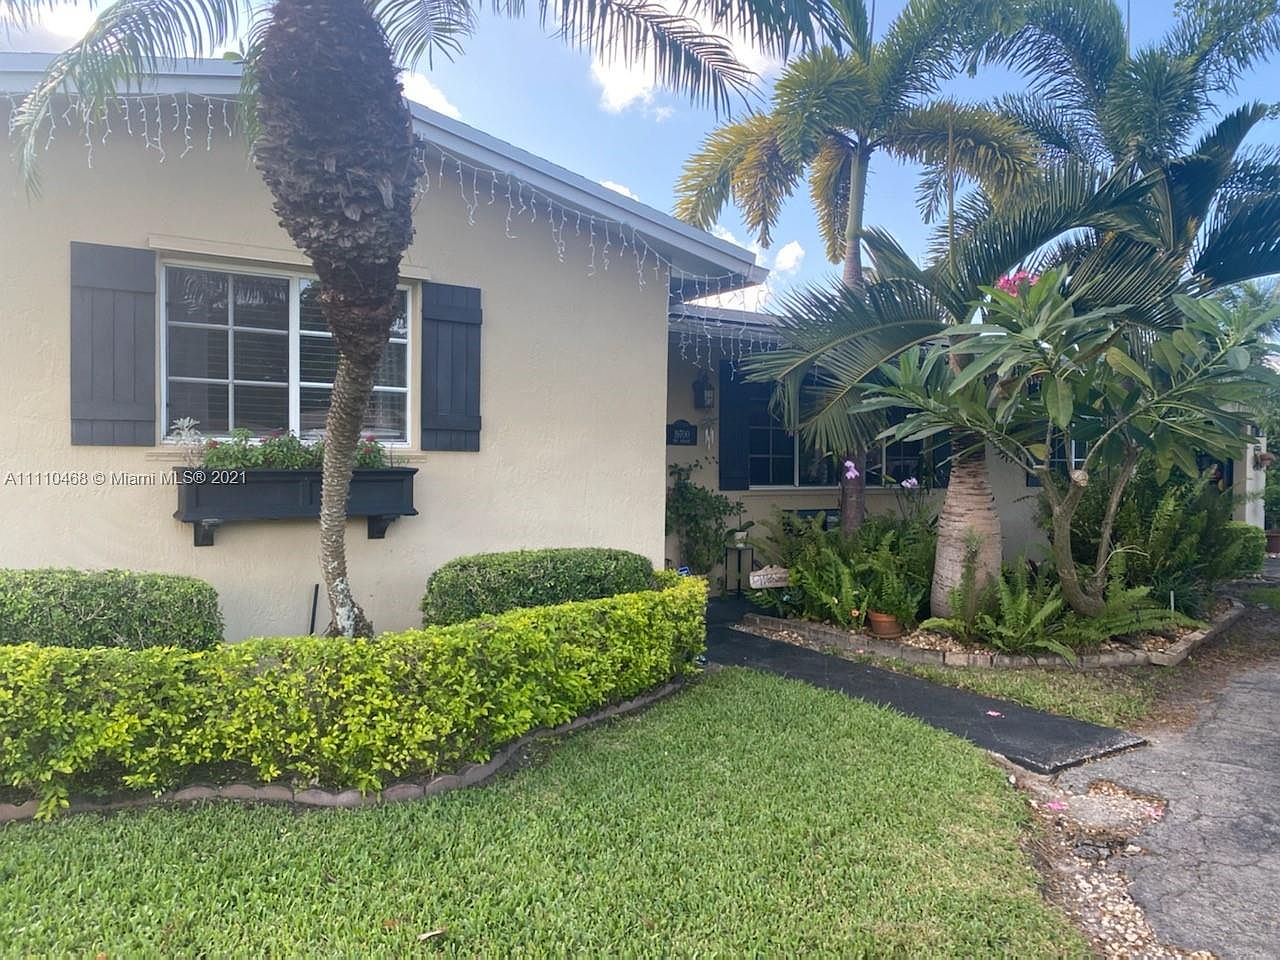 19700 SW 87th Ave, Cutler Bay, FL 33157 | MLS #A11110468 | Zillow